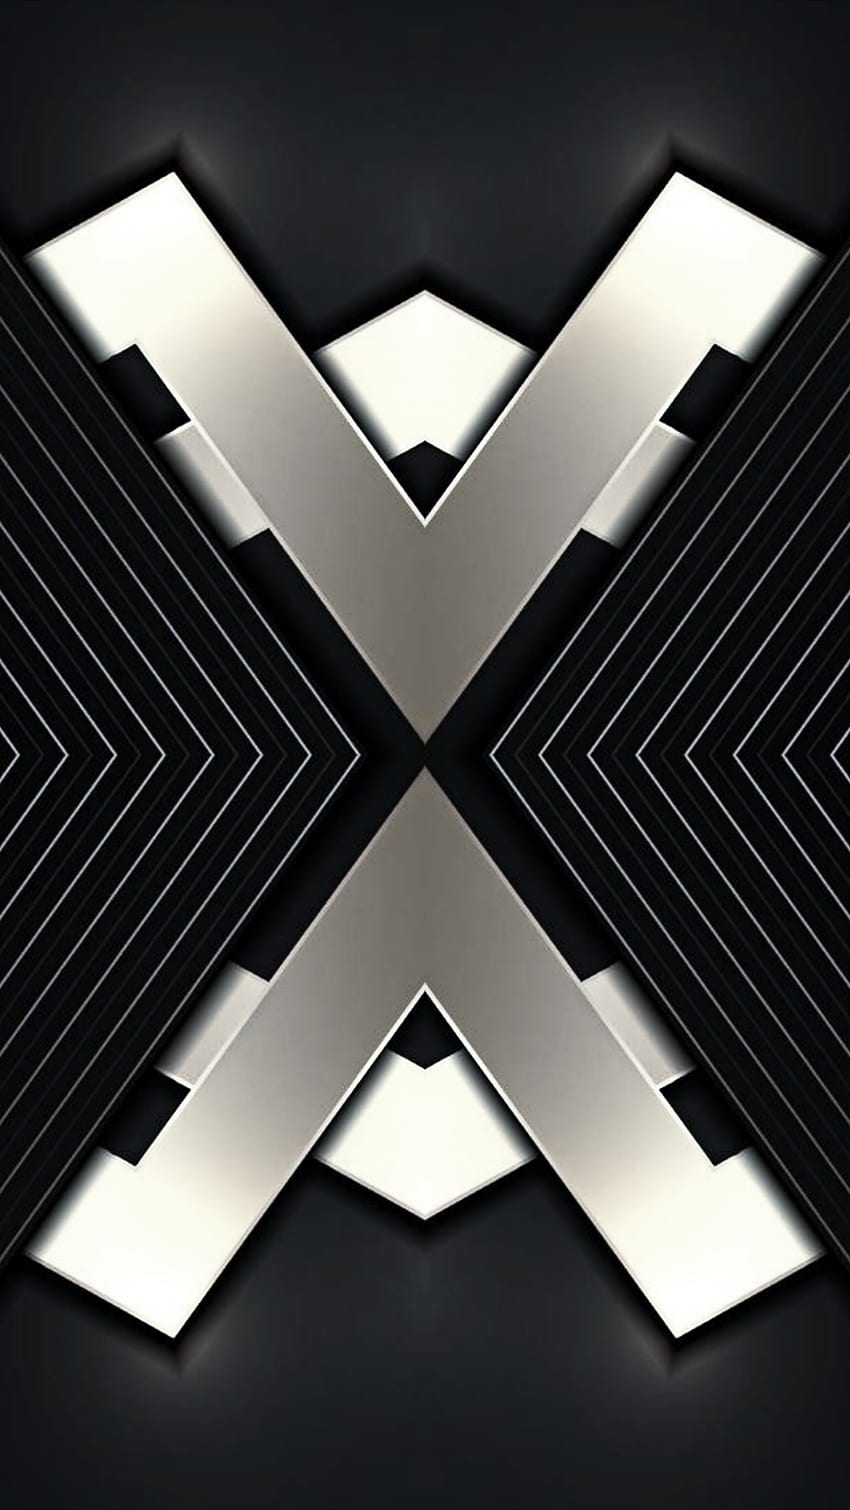 fkjlh, shadow, android, bright, oled, pattern, tint, triangles, 3d, amoled, samsung, material property, modern, flat, shapes, design, dark, galaxy, lines, digital, new, art, neon, texture, black, abstract, iphone, plus, material, corporate, mate, , geometric, shiny, silver HD phone wallpaper